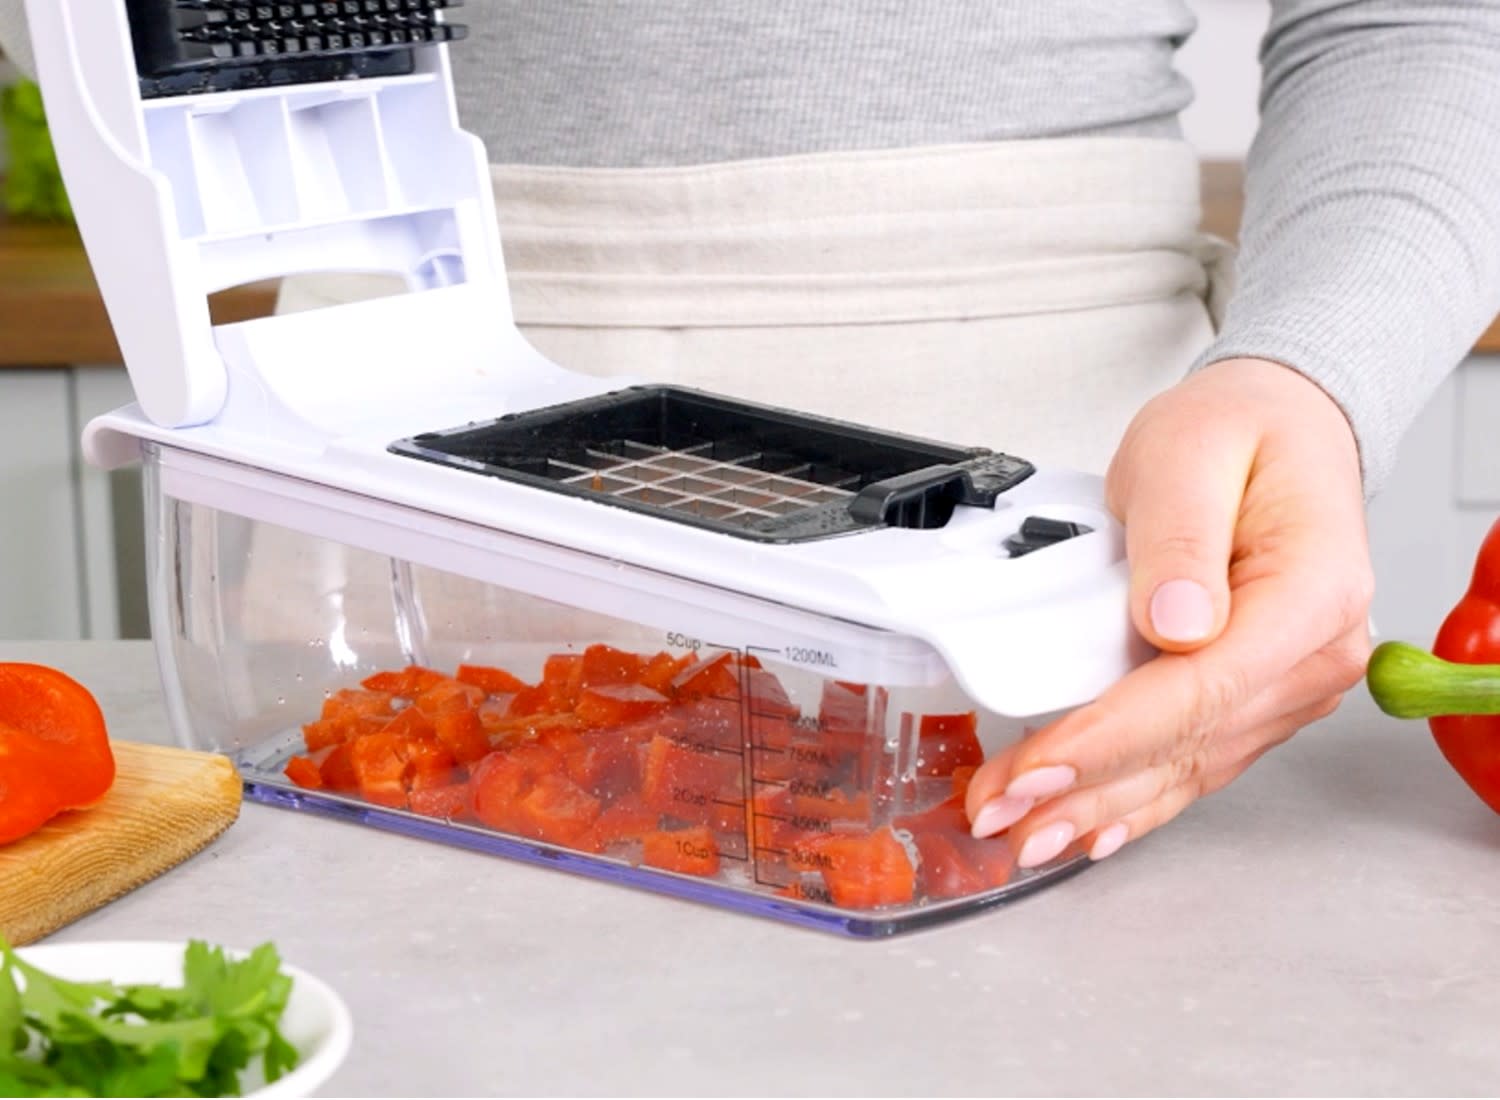 TikTok's Viral Vegetable Chopper Is 25% Off Right Now